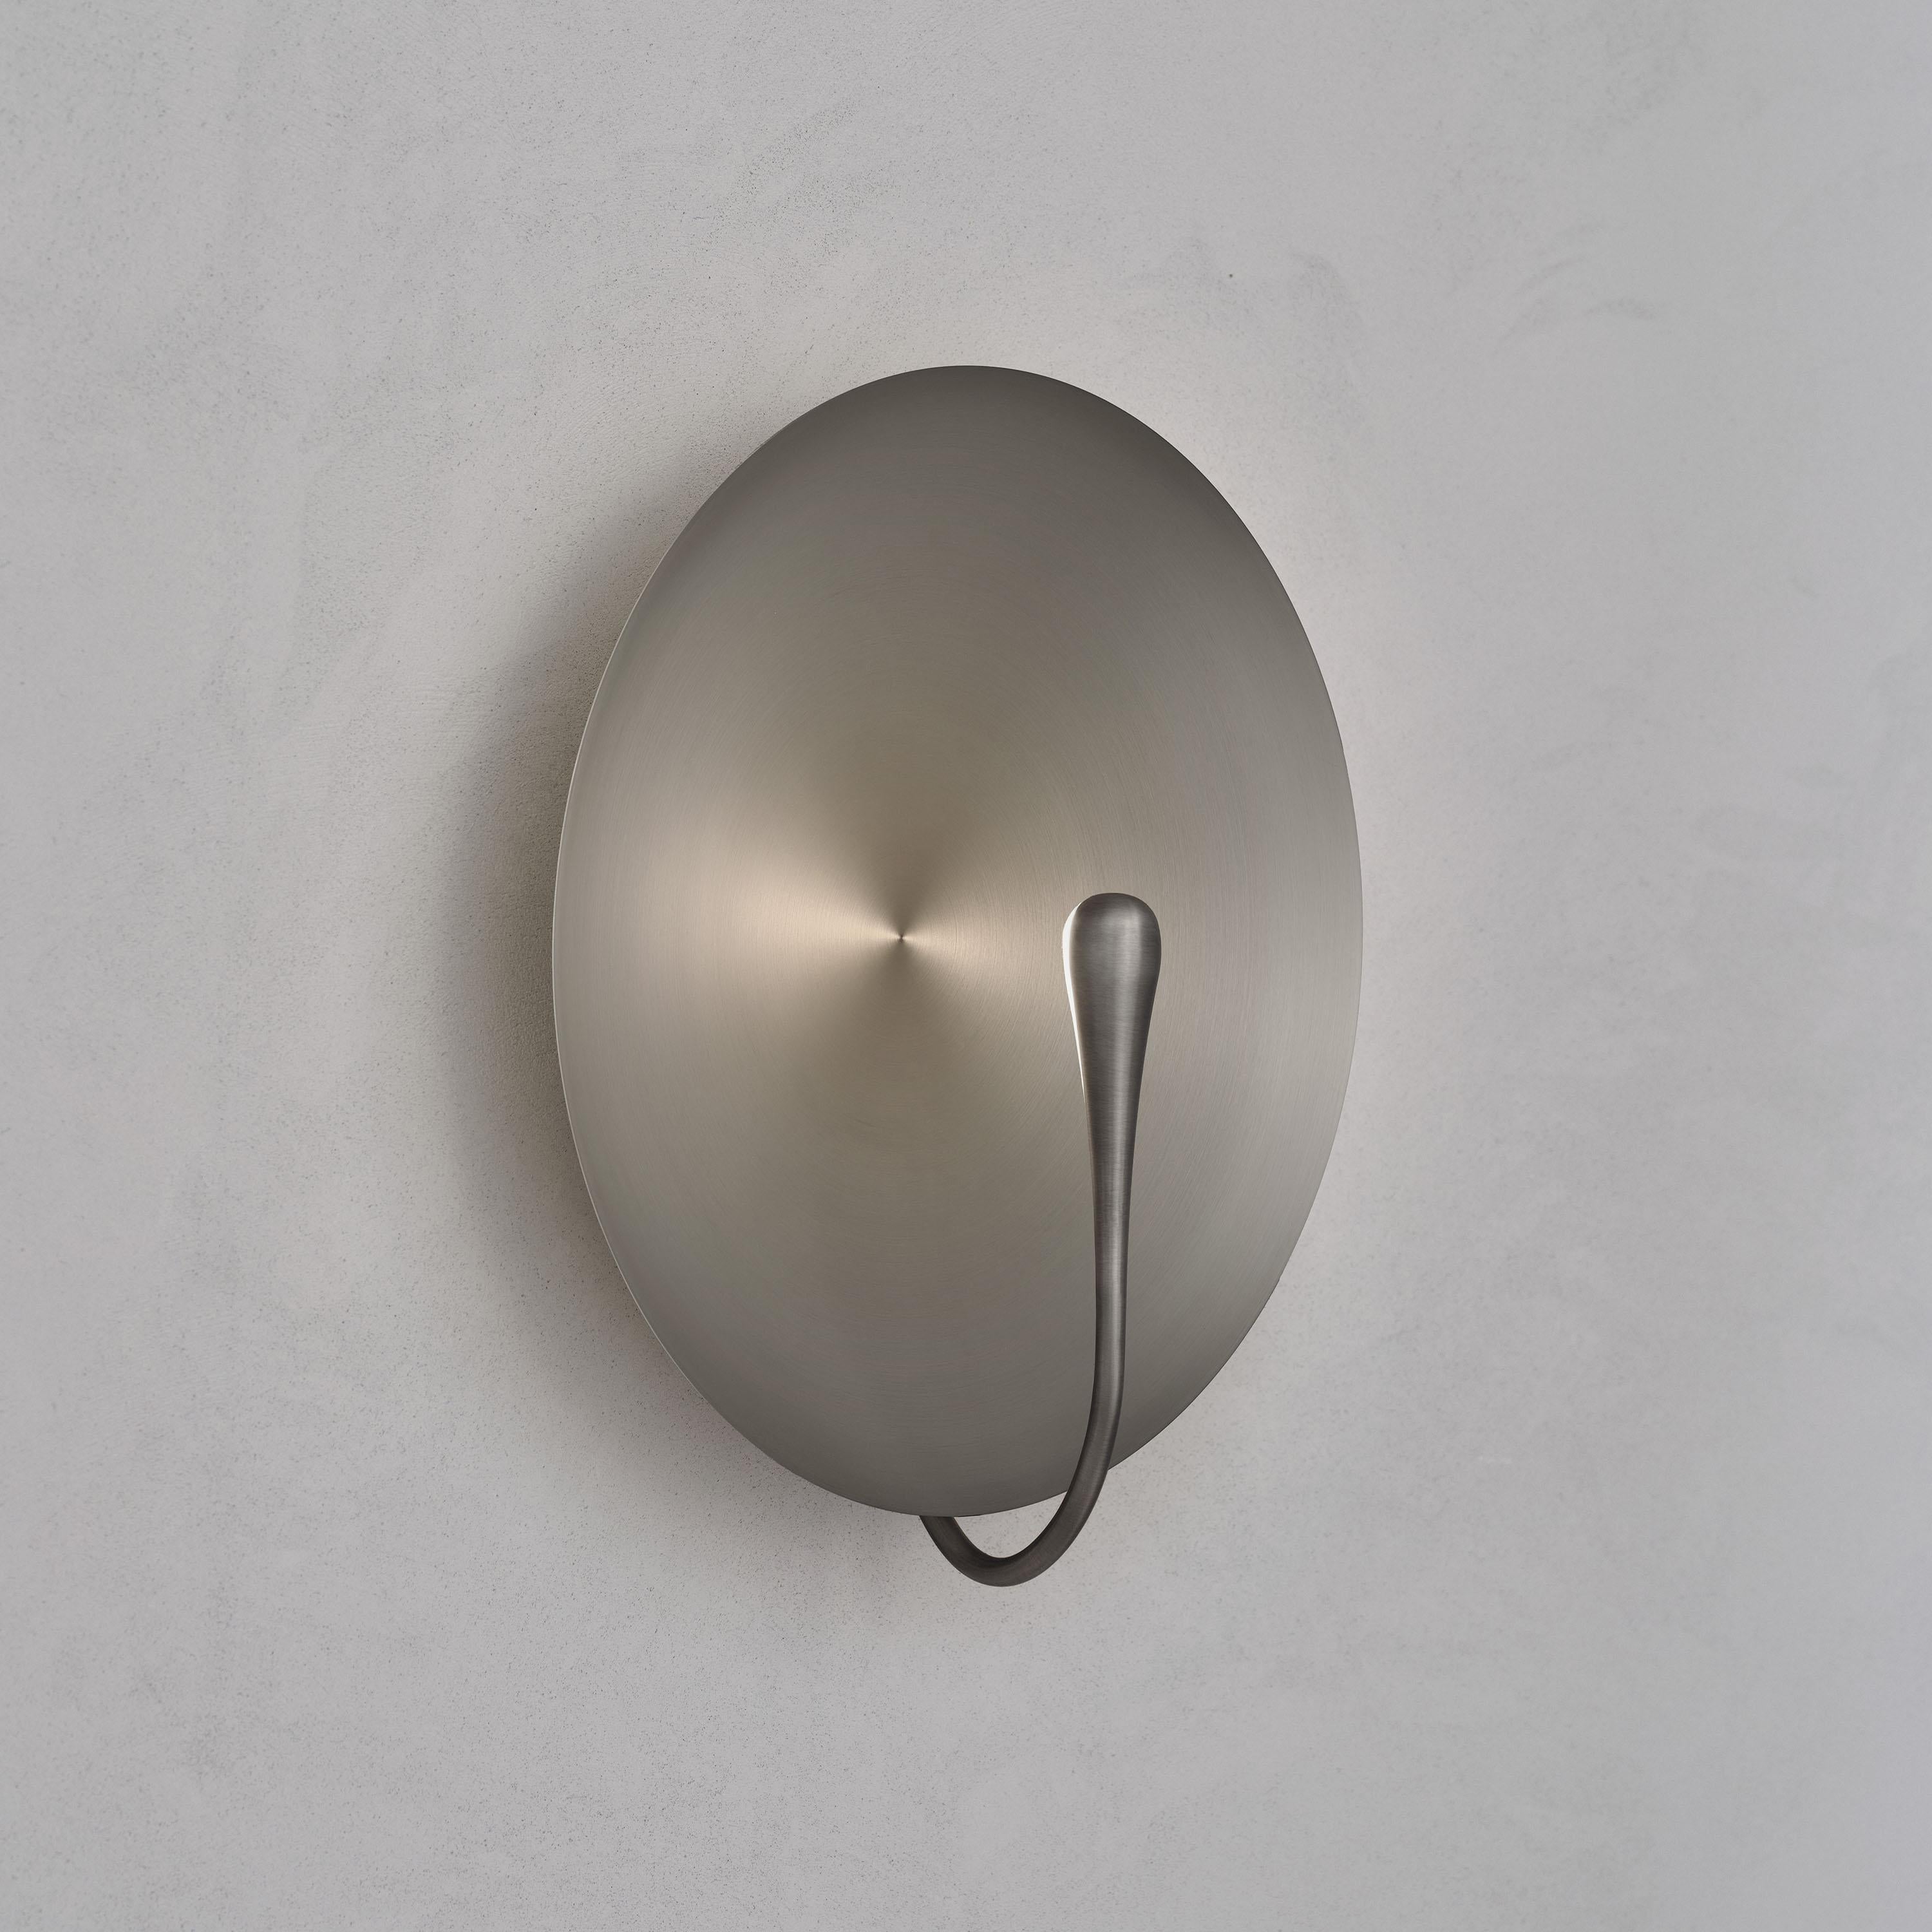 British 'Cosmic Seleno ' Handmade Brushed Steel Contemporary Wall Light Sconce For Sale